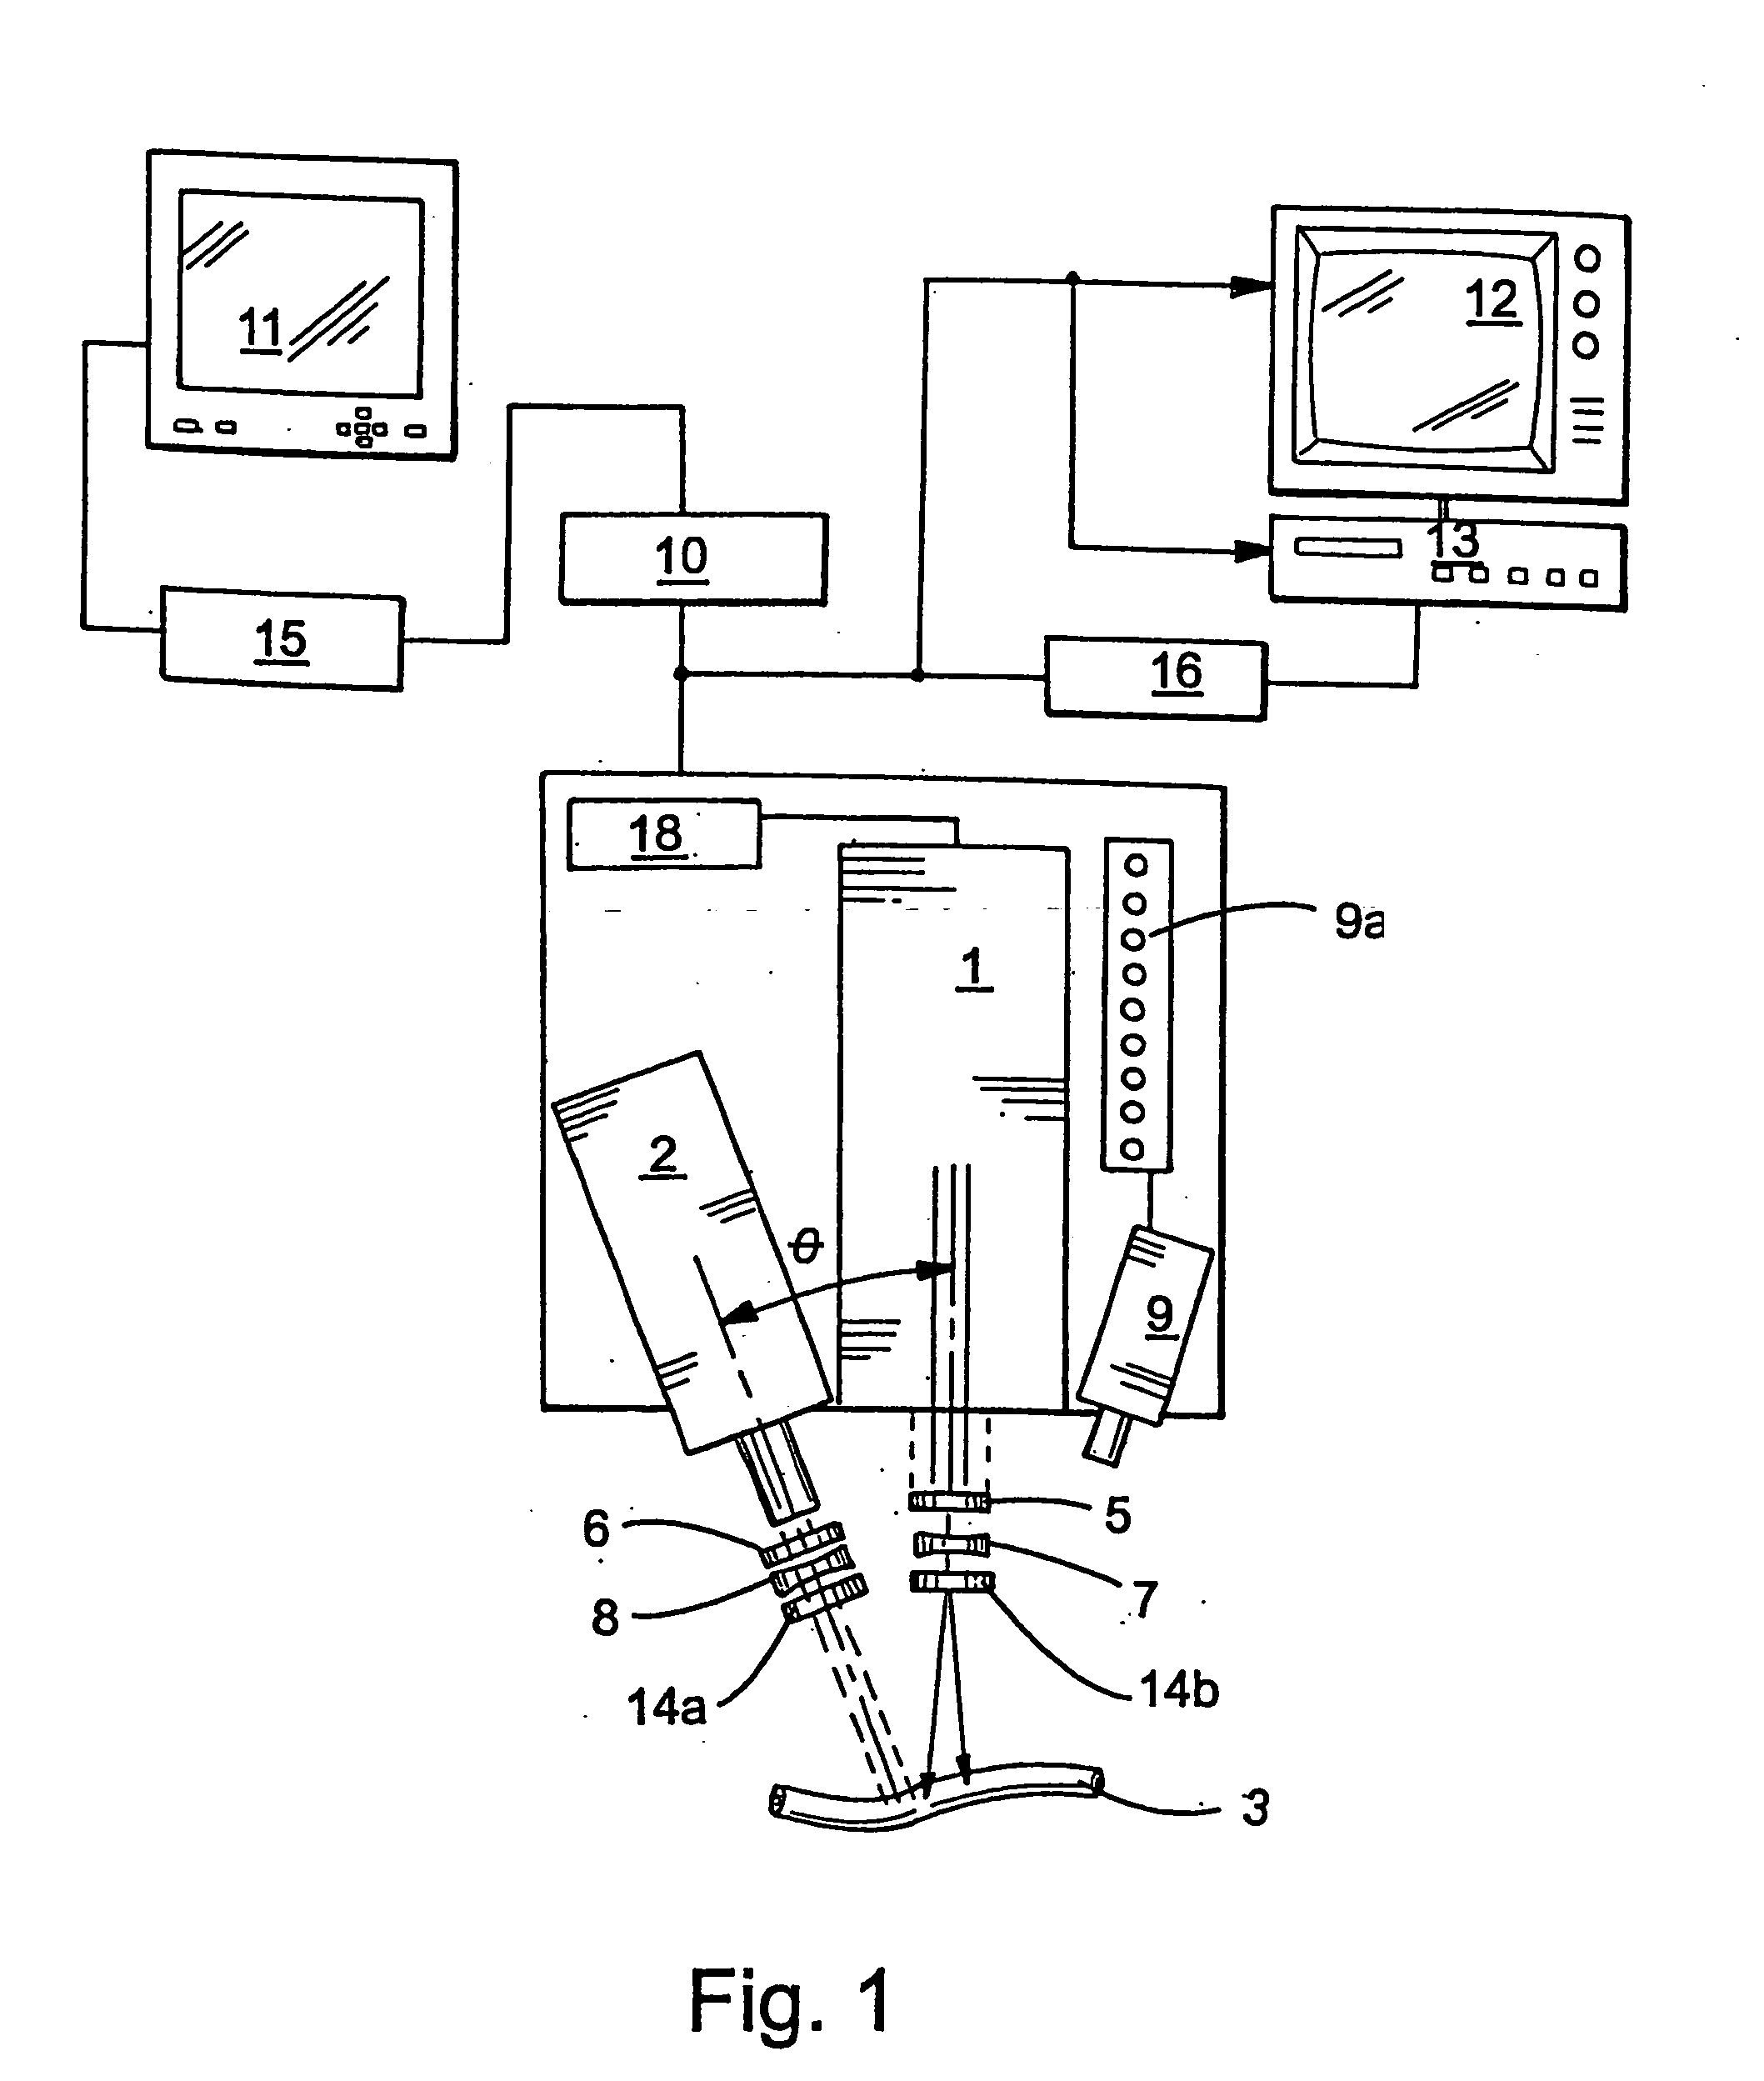 Method and apparatus for performing intra-operative angiography